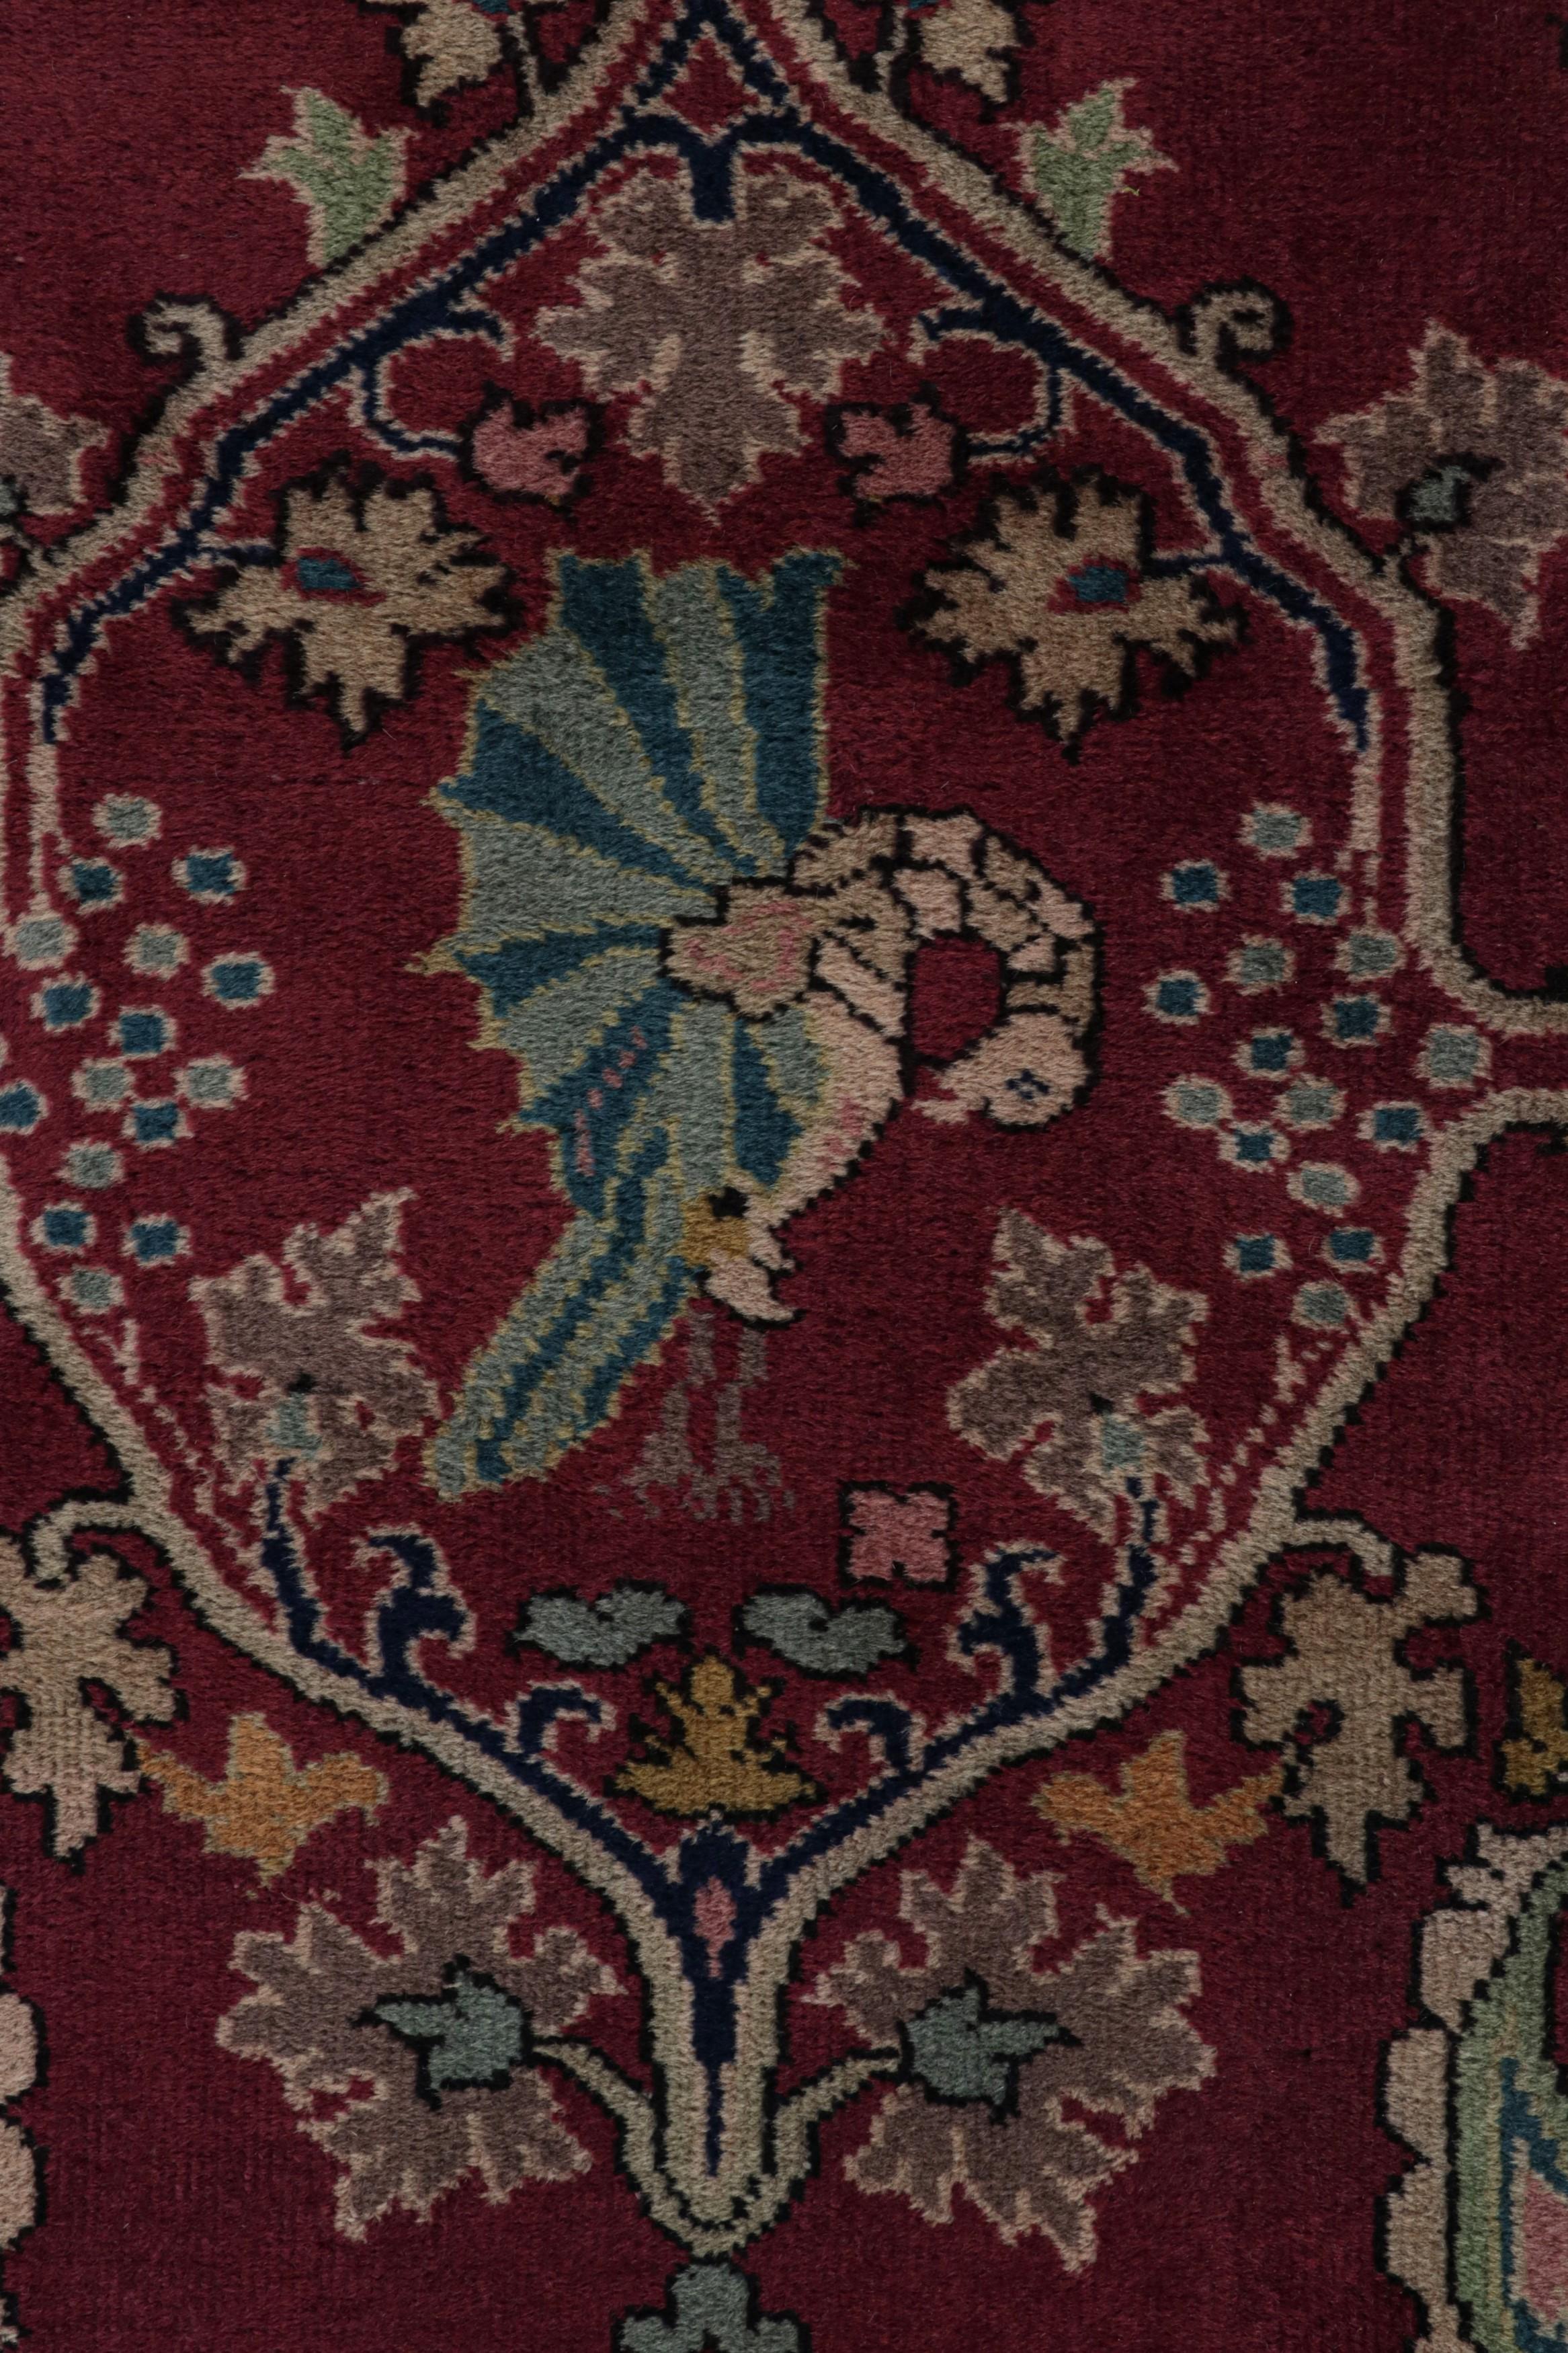 Antique Indian Rug in Burgundy and Gold with Floral Patterns In Good Condition For Sale In Long Island City, NY